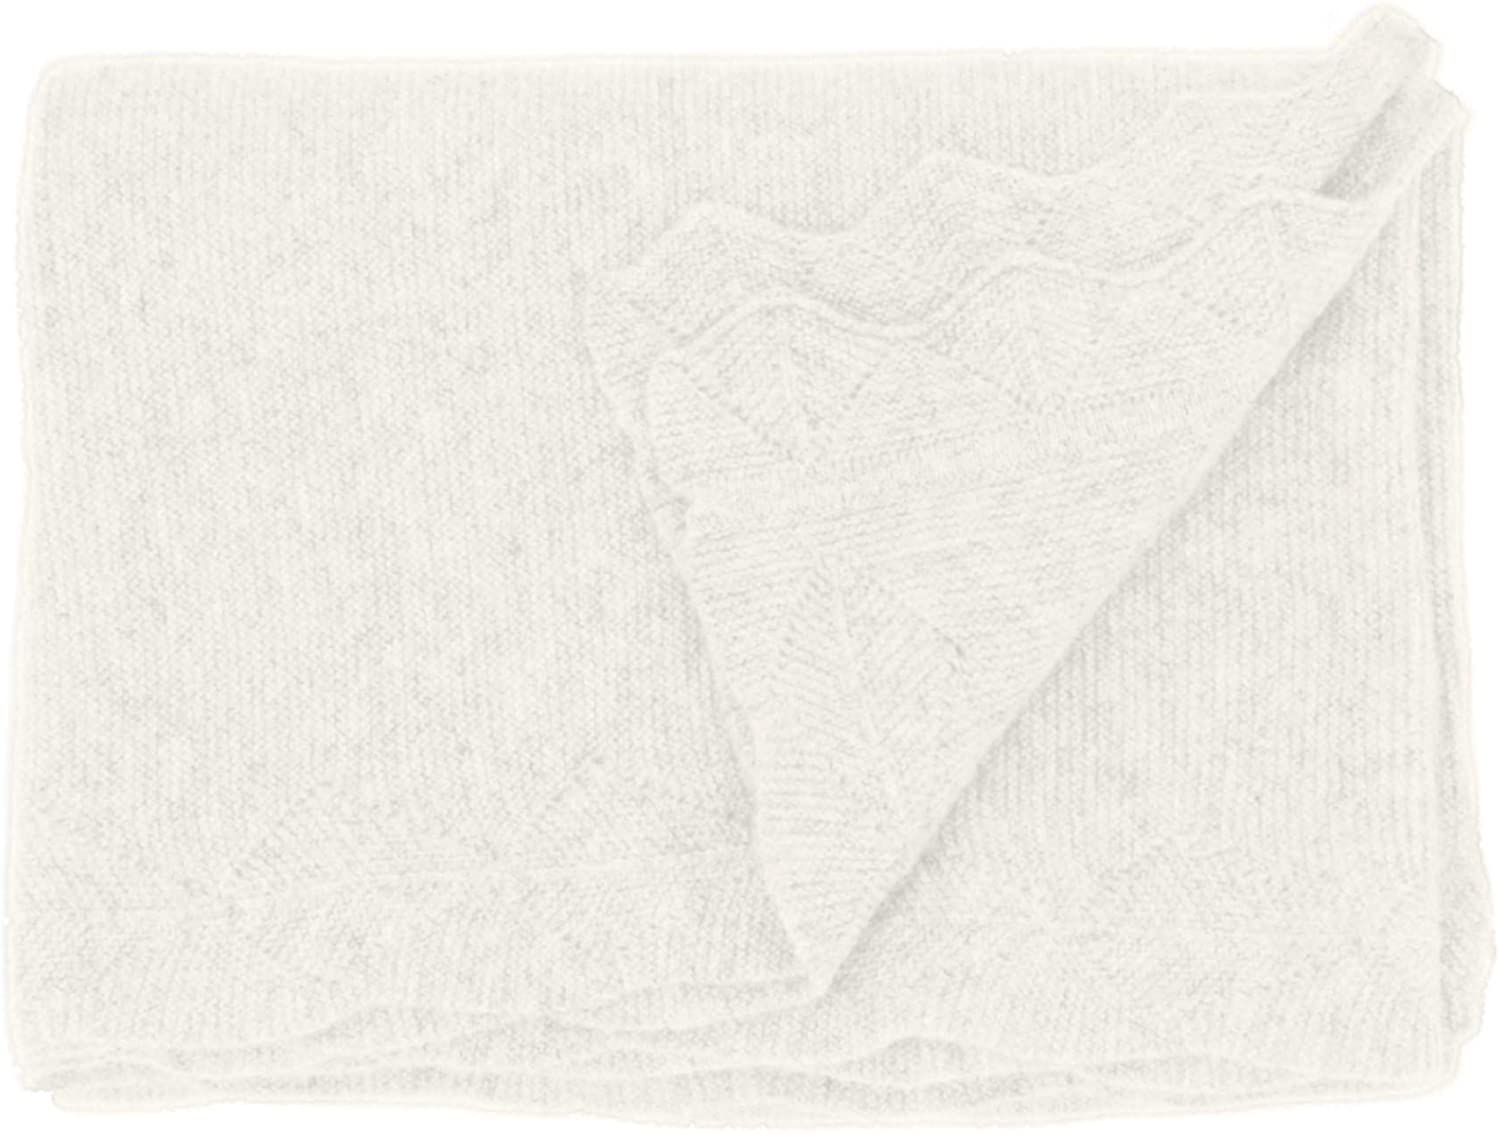 State Cashmere Luxe Stroller Baby Blanket 100% Pure Cashmere Travel Wrap Lightweight and Warm • 40 x 30 inches (Ivory)